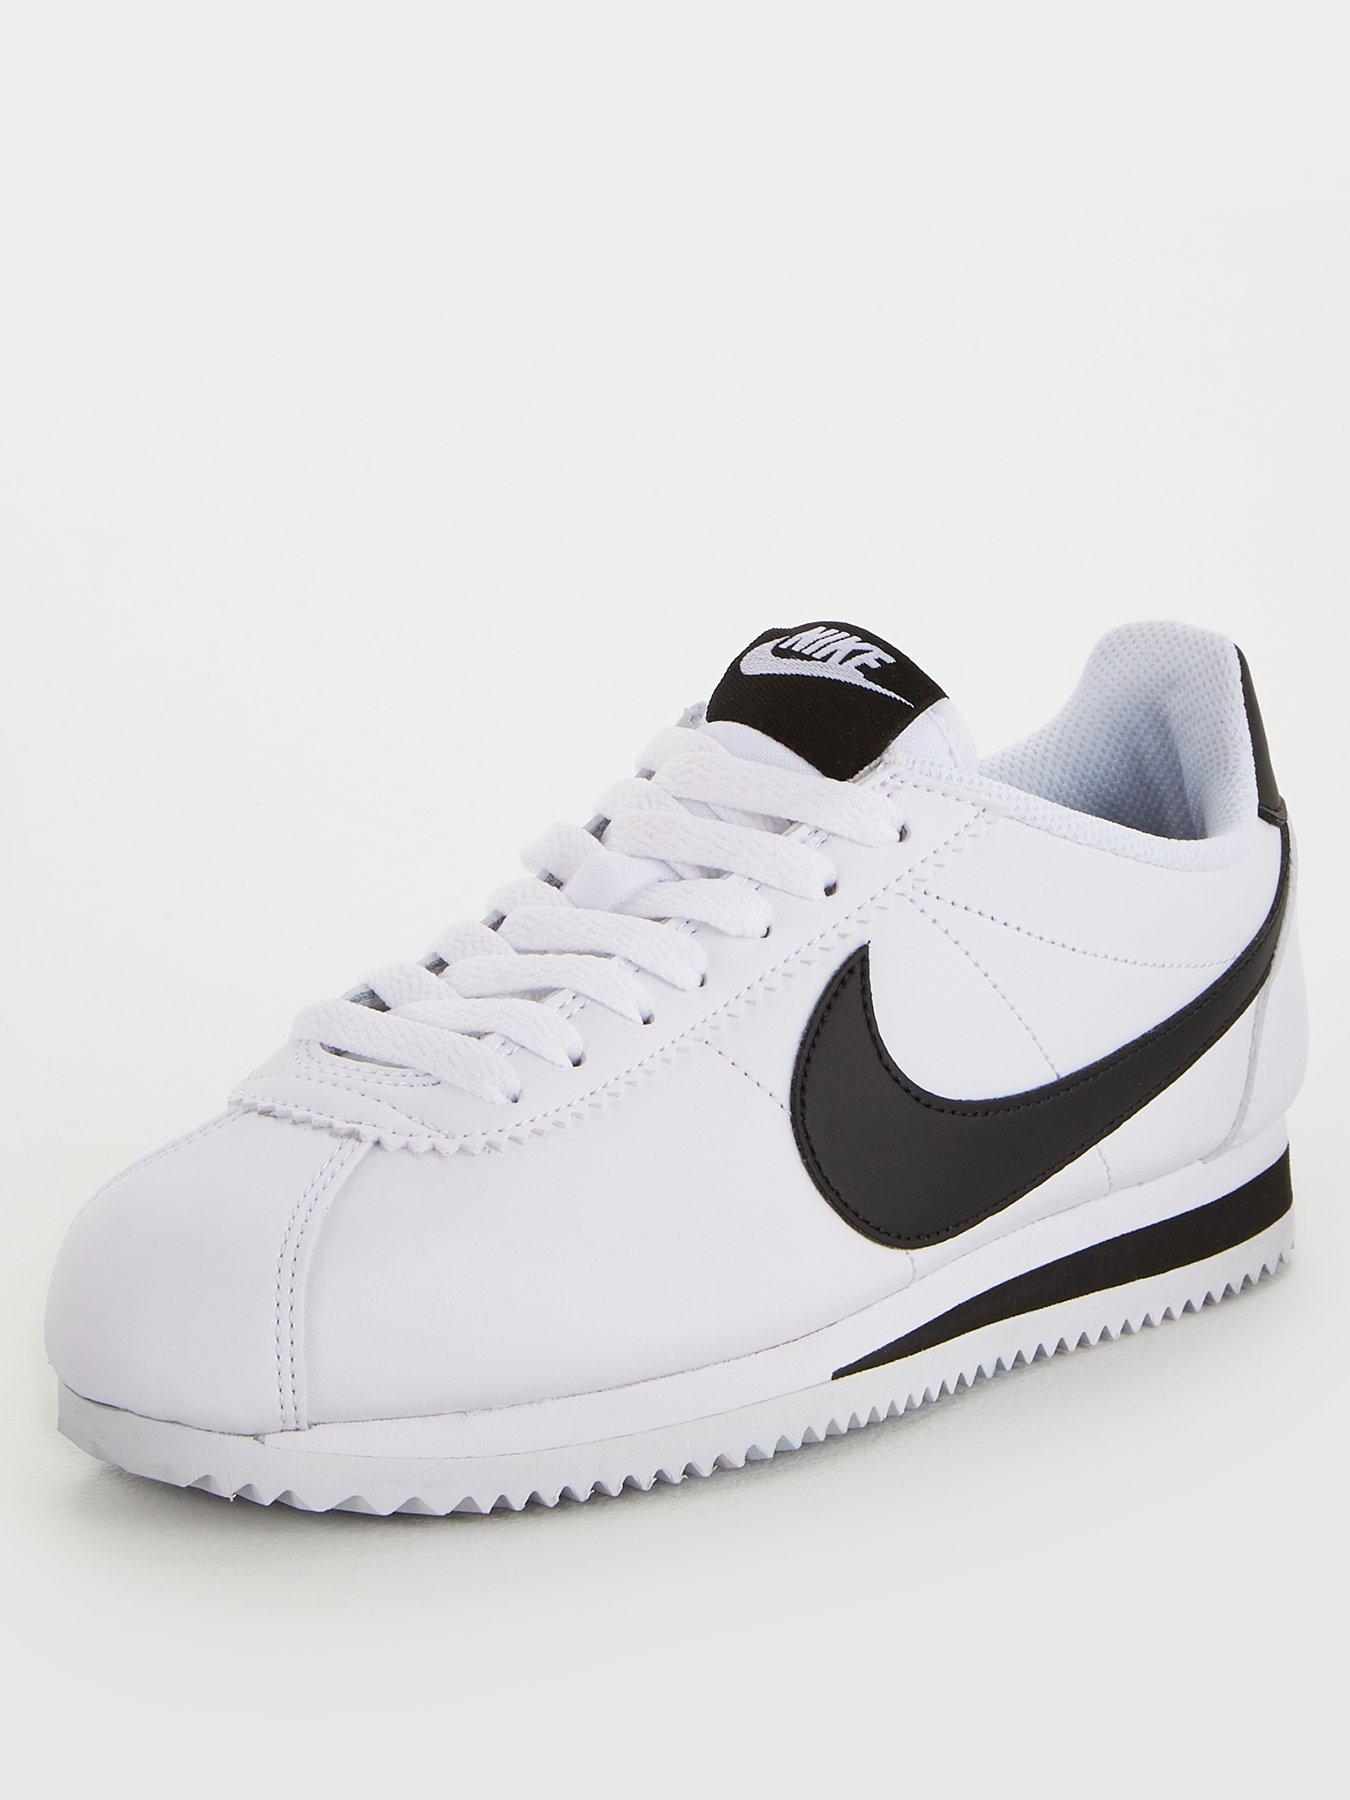 women's black and white nike trainers